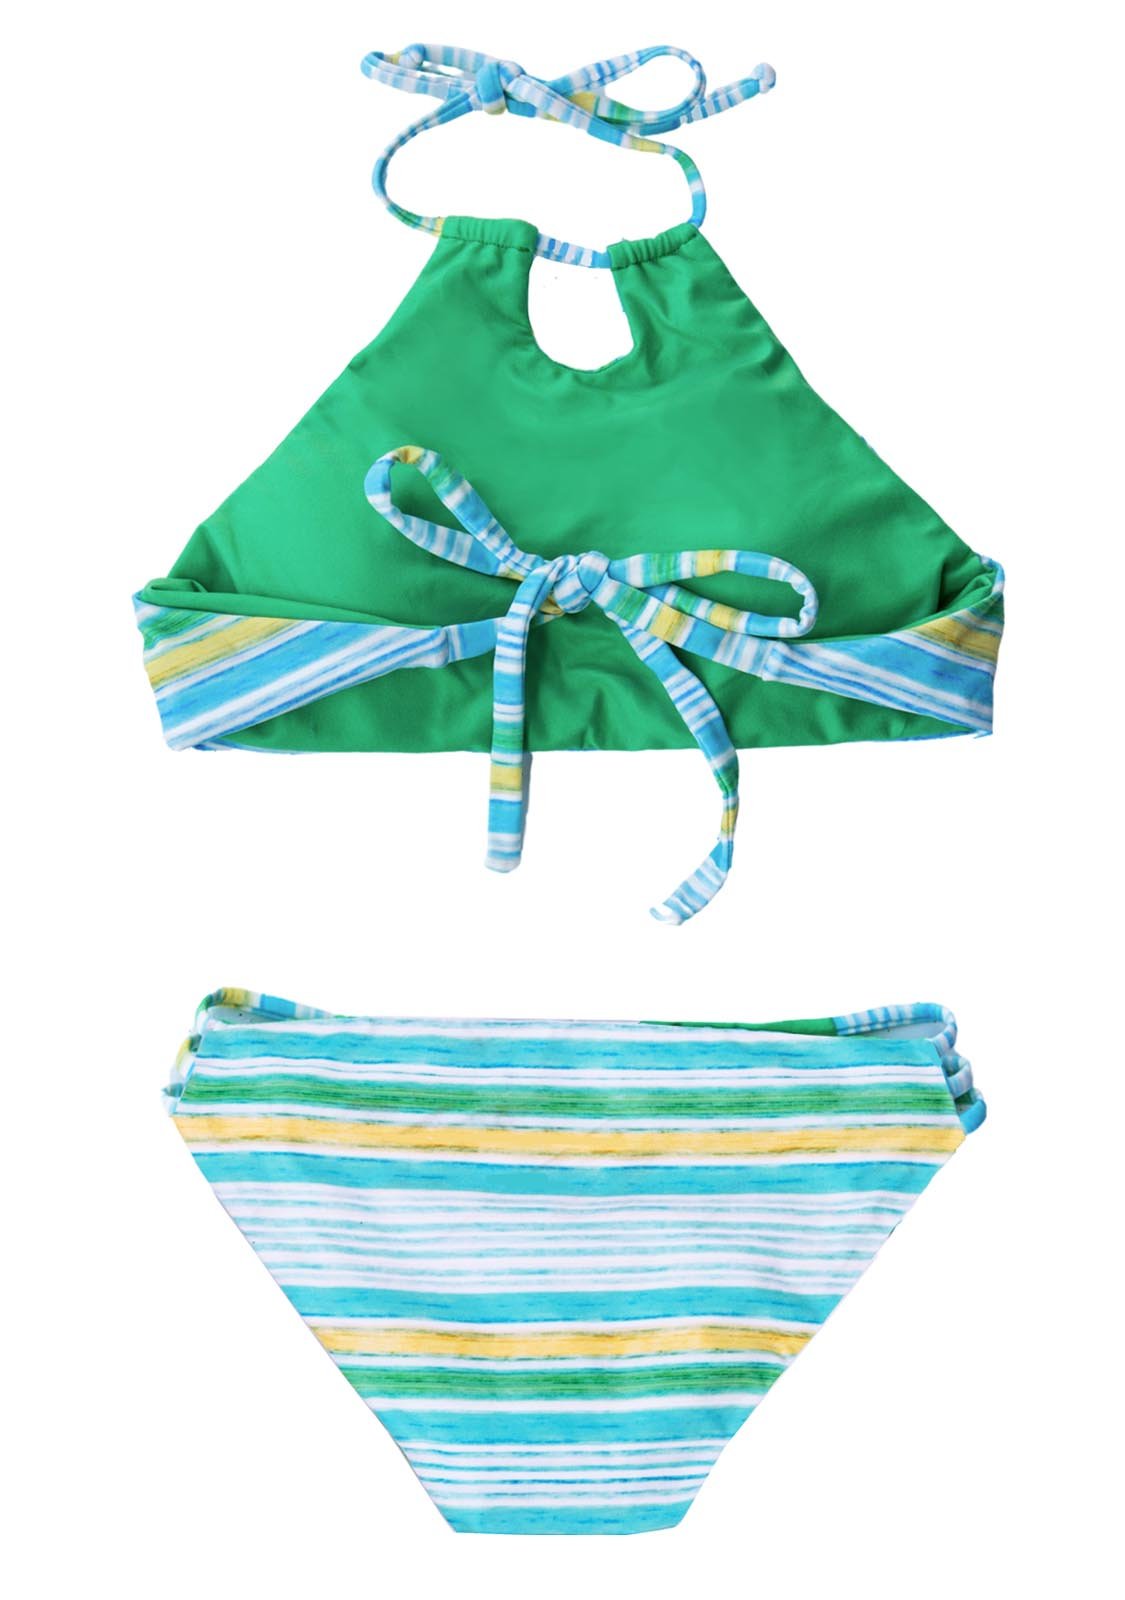 Fashion Teen swimwear reversible striped blue green yellow bathing suit for teen girls by Chance Loves